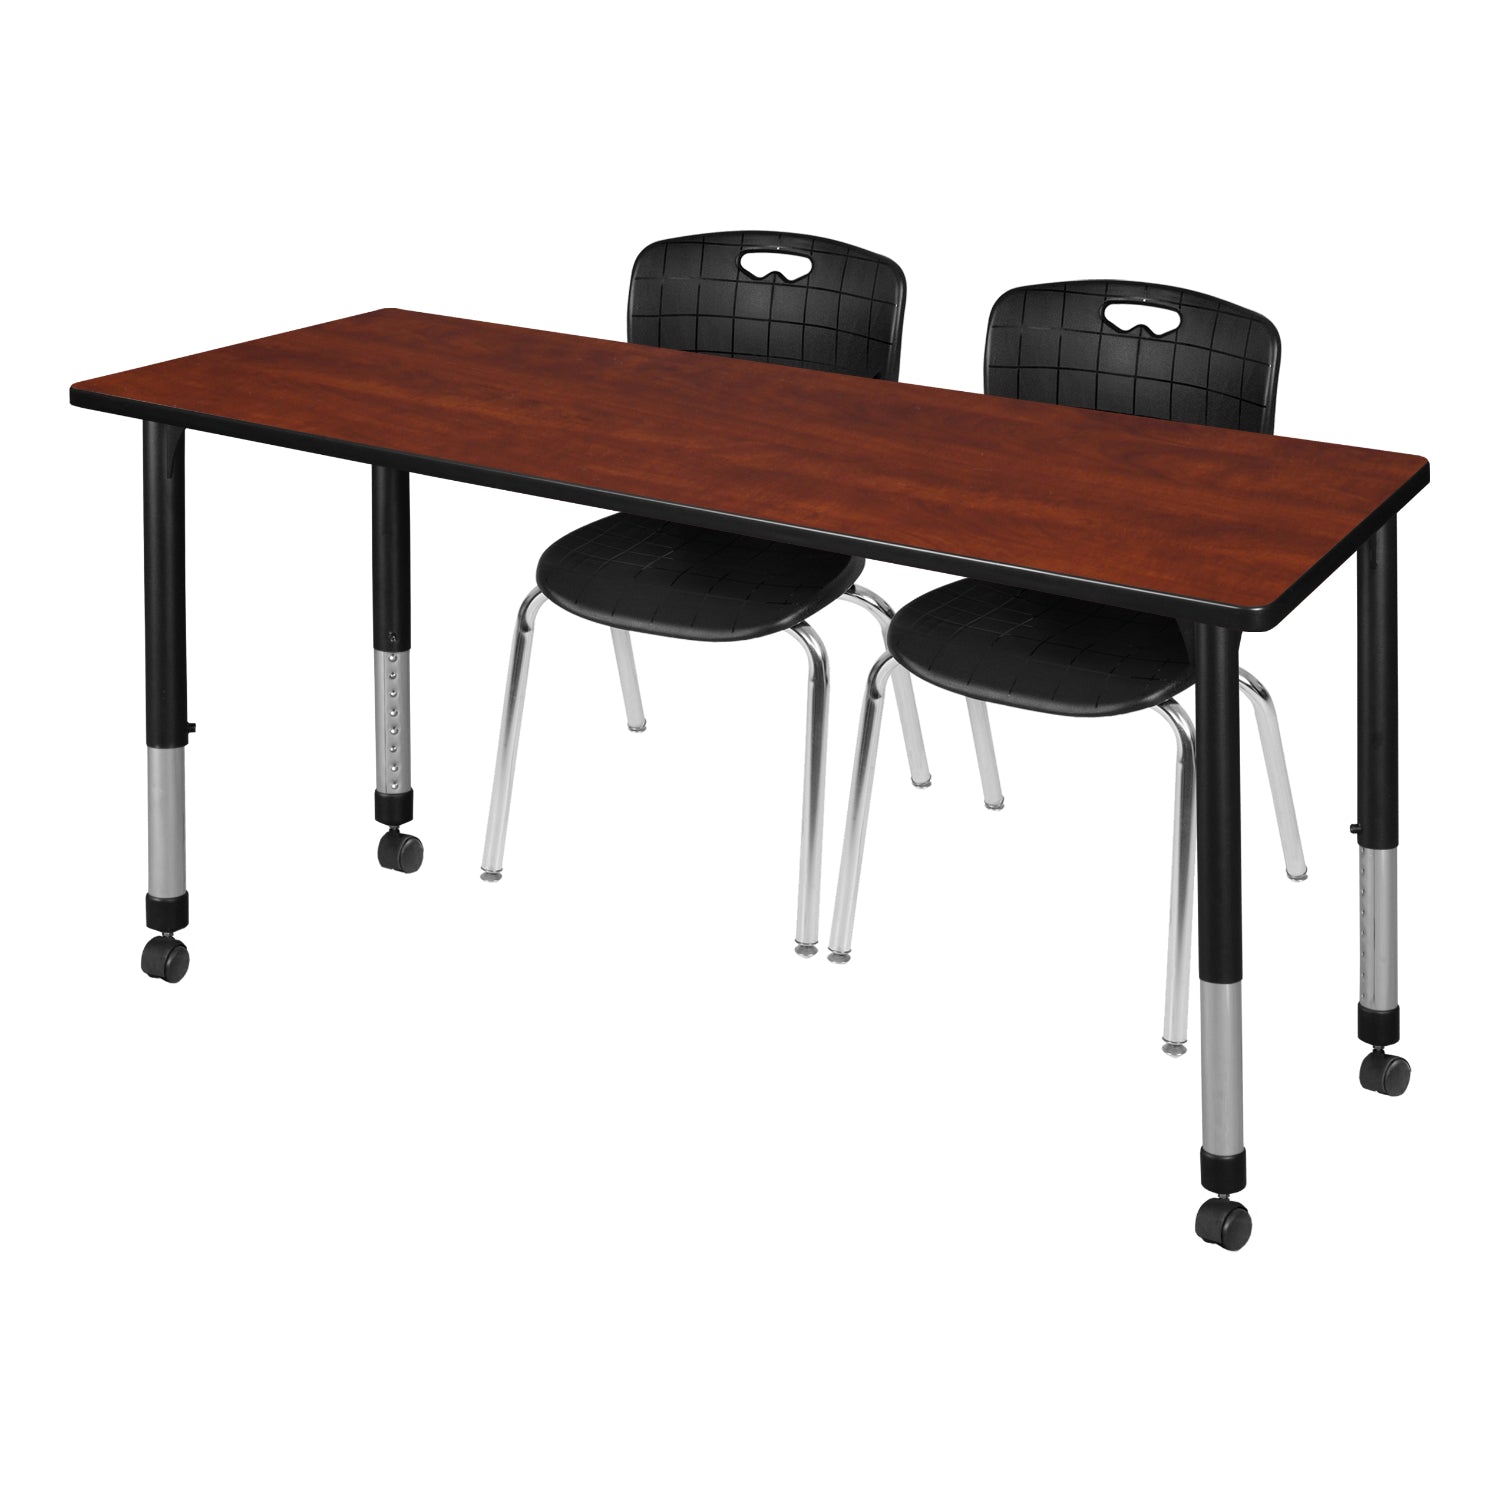 Kee Classroom Table and Chair Package, Kee 60" x 24" Rectangular Mobile Adjustable Height Table with 2 Andy 18" Stack Chairs